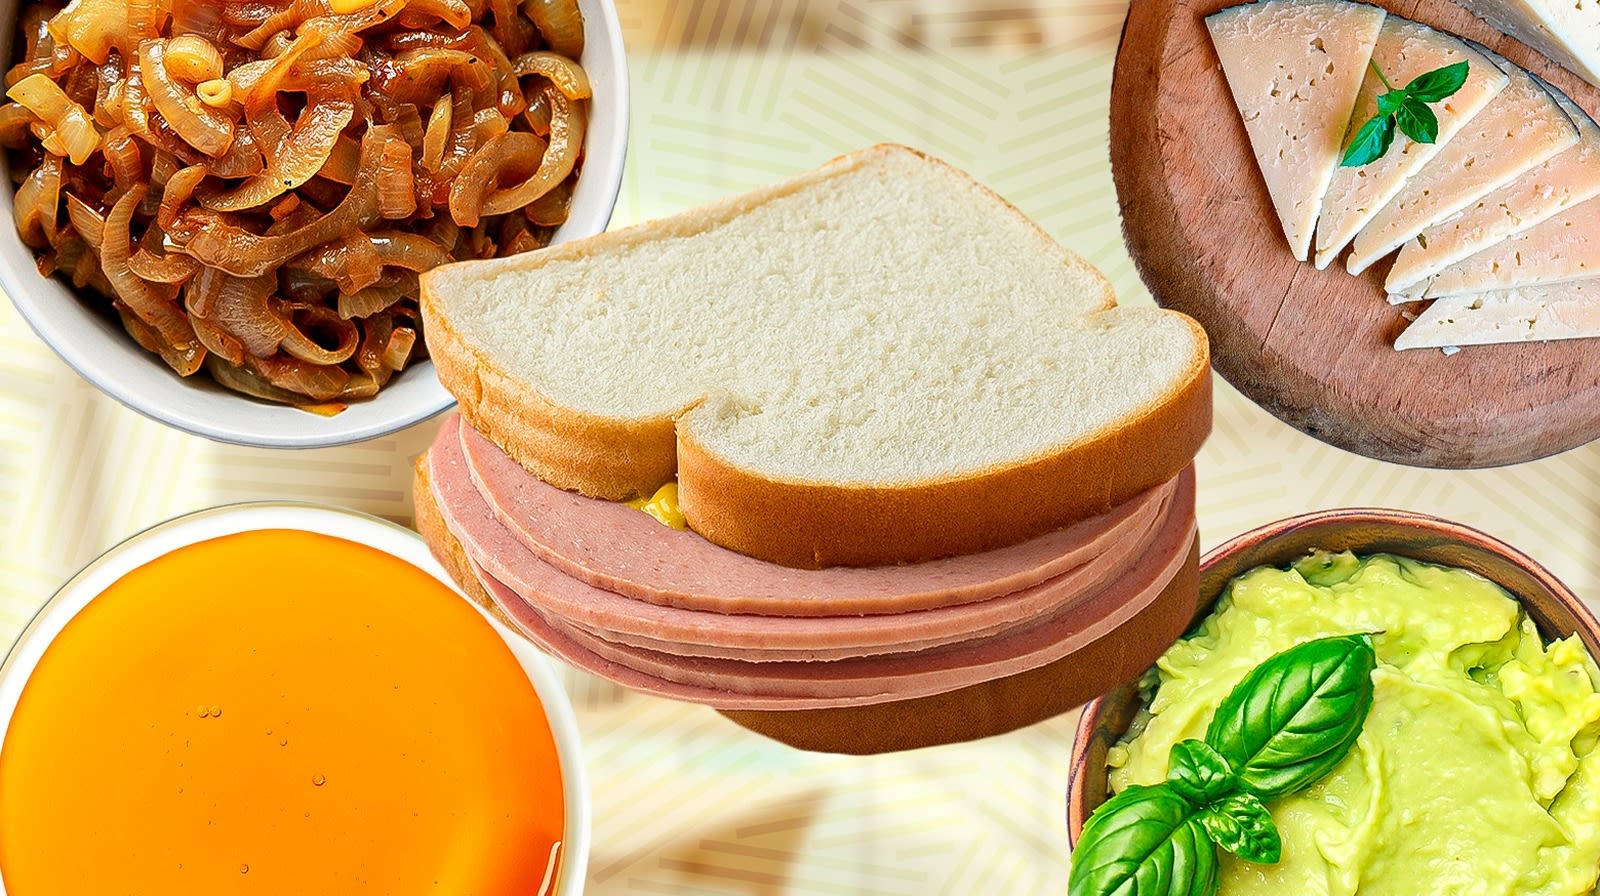 15 Luxurious Upgrades For Bologna Sandwiches